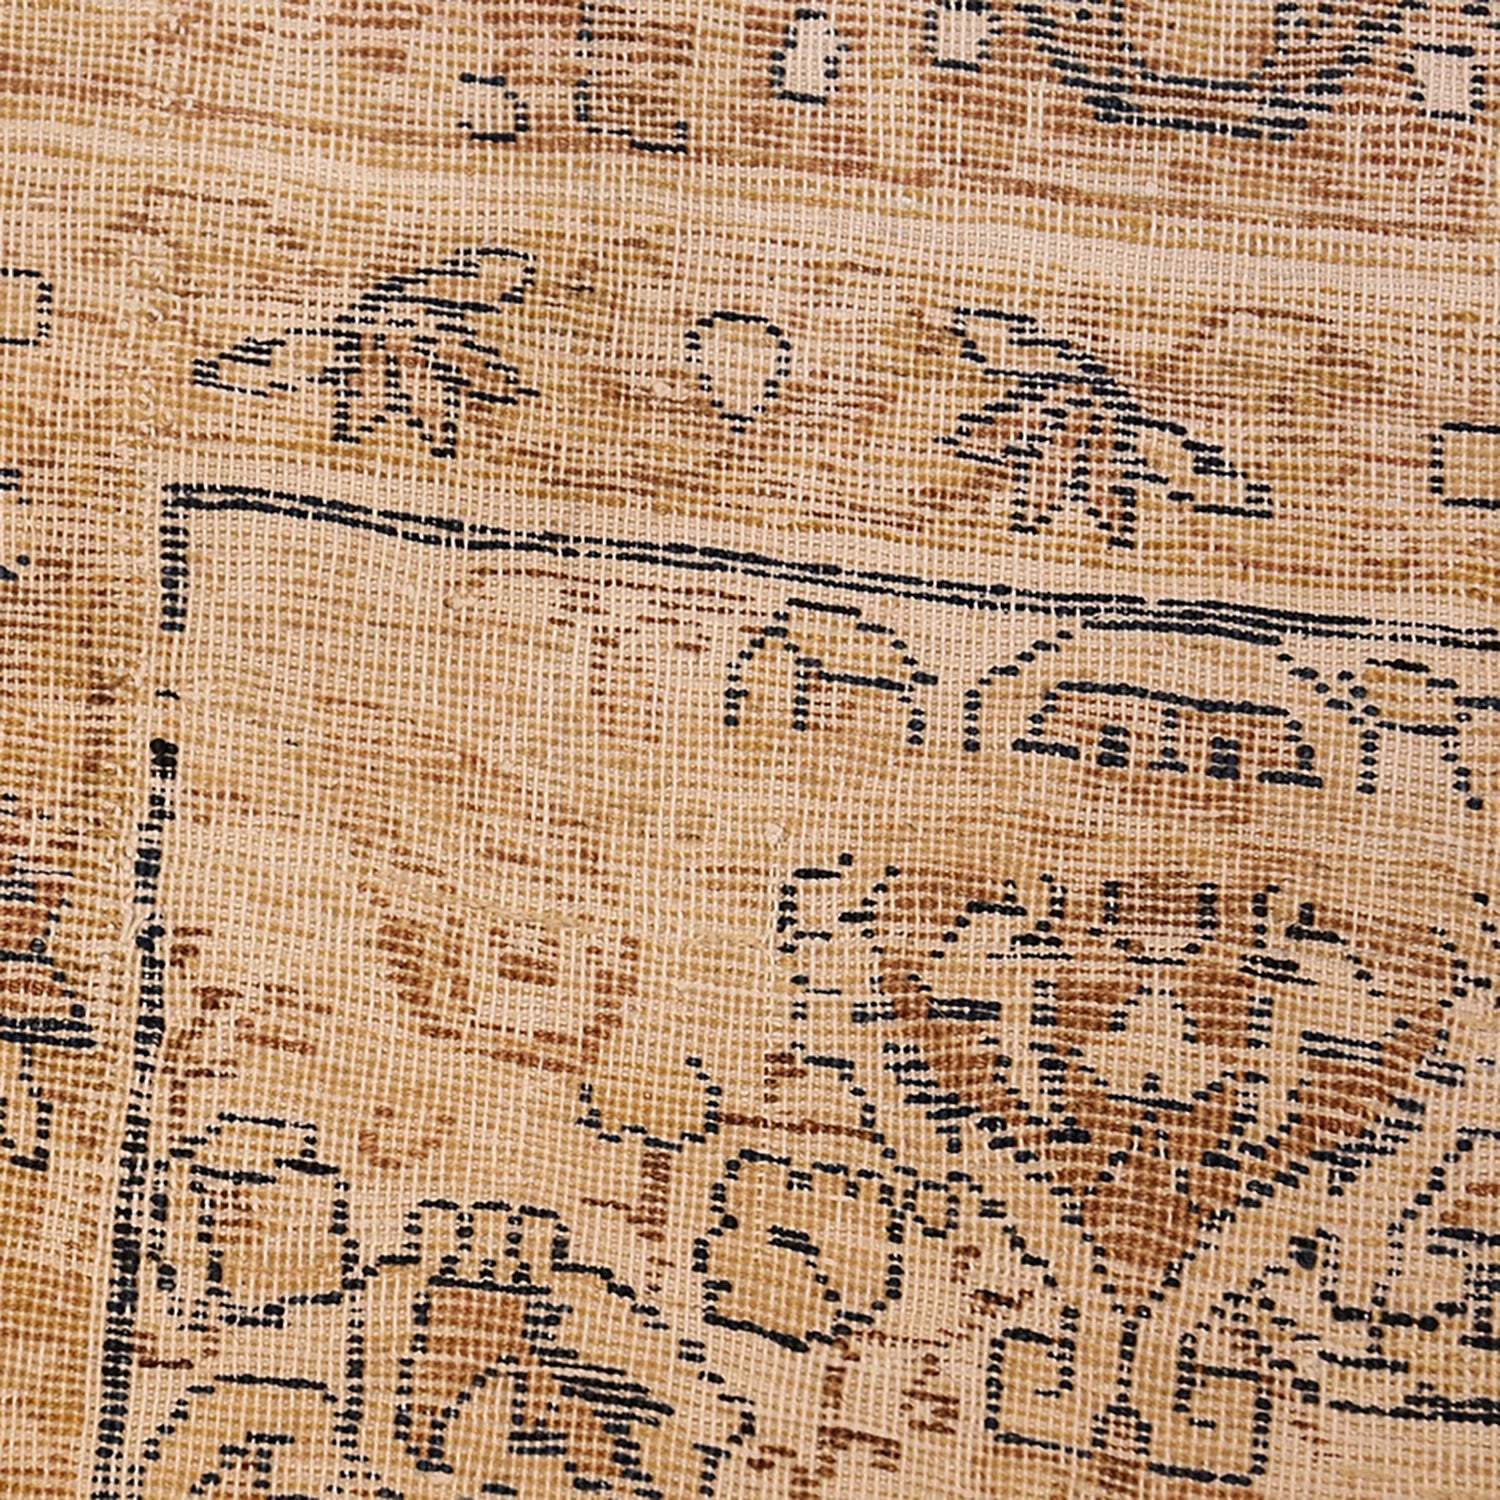 Close-up of intricate woven fabric with plant motifs and borders.